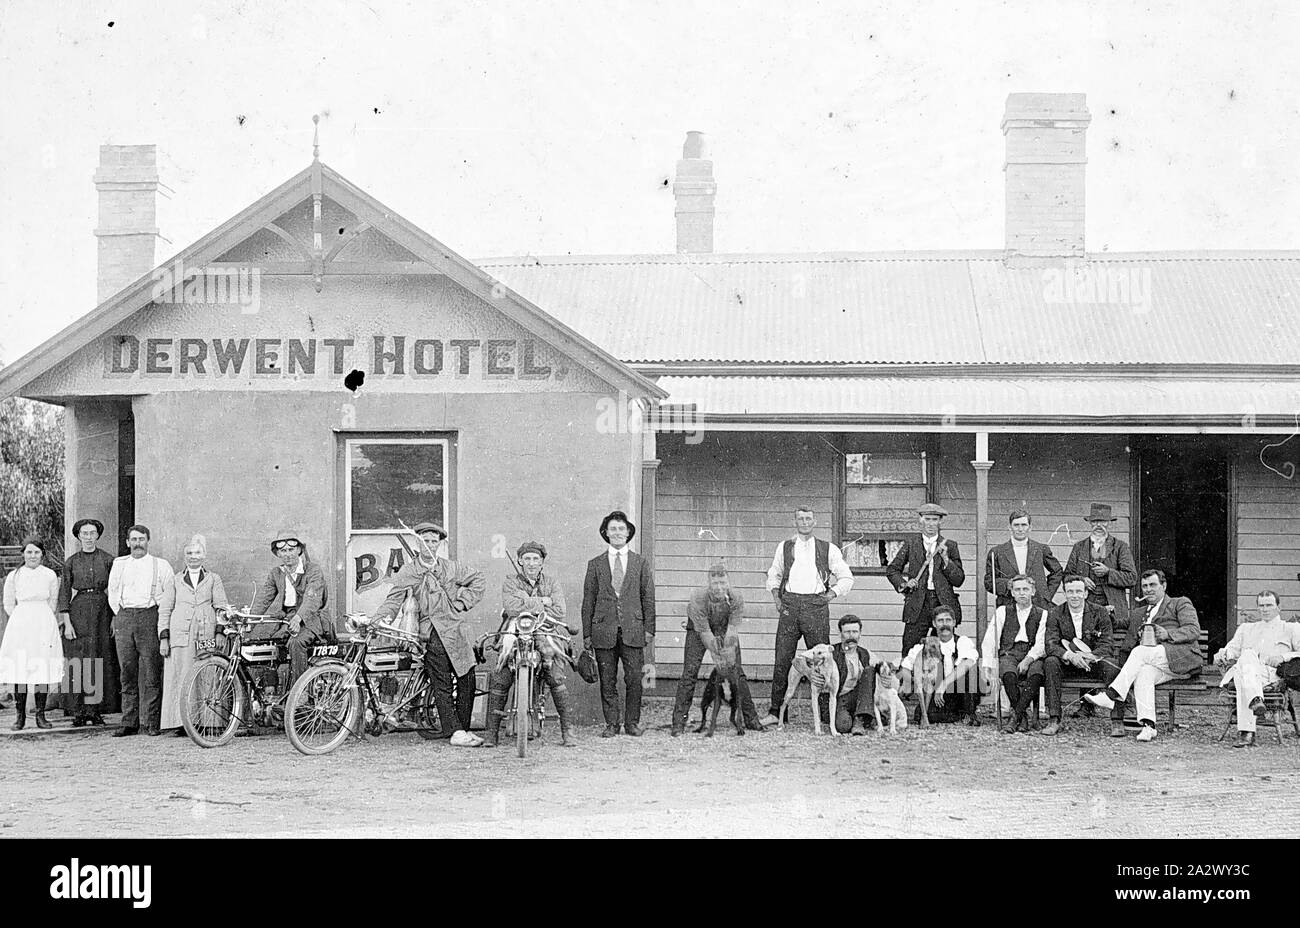 Negative - Motor Cycle Hunting Party with Group of Locals Outside Derwent Hotel, Batesford, Victoria, circa 1915, A group of eighteen (18) people standing and seated in front of the Derwent Hotel at Batesford. Three of the group are standing beside or astride early motor bikes, identified as being pre-World War I model Triumph motor cycles of single cylinder belt-driven type, with acetylene headlamps. The men are wearing hunting outfits and have motor cycle googles, and have rifles slung over their shoulders Stock Photo